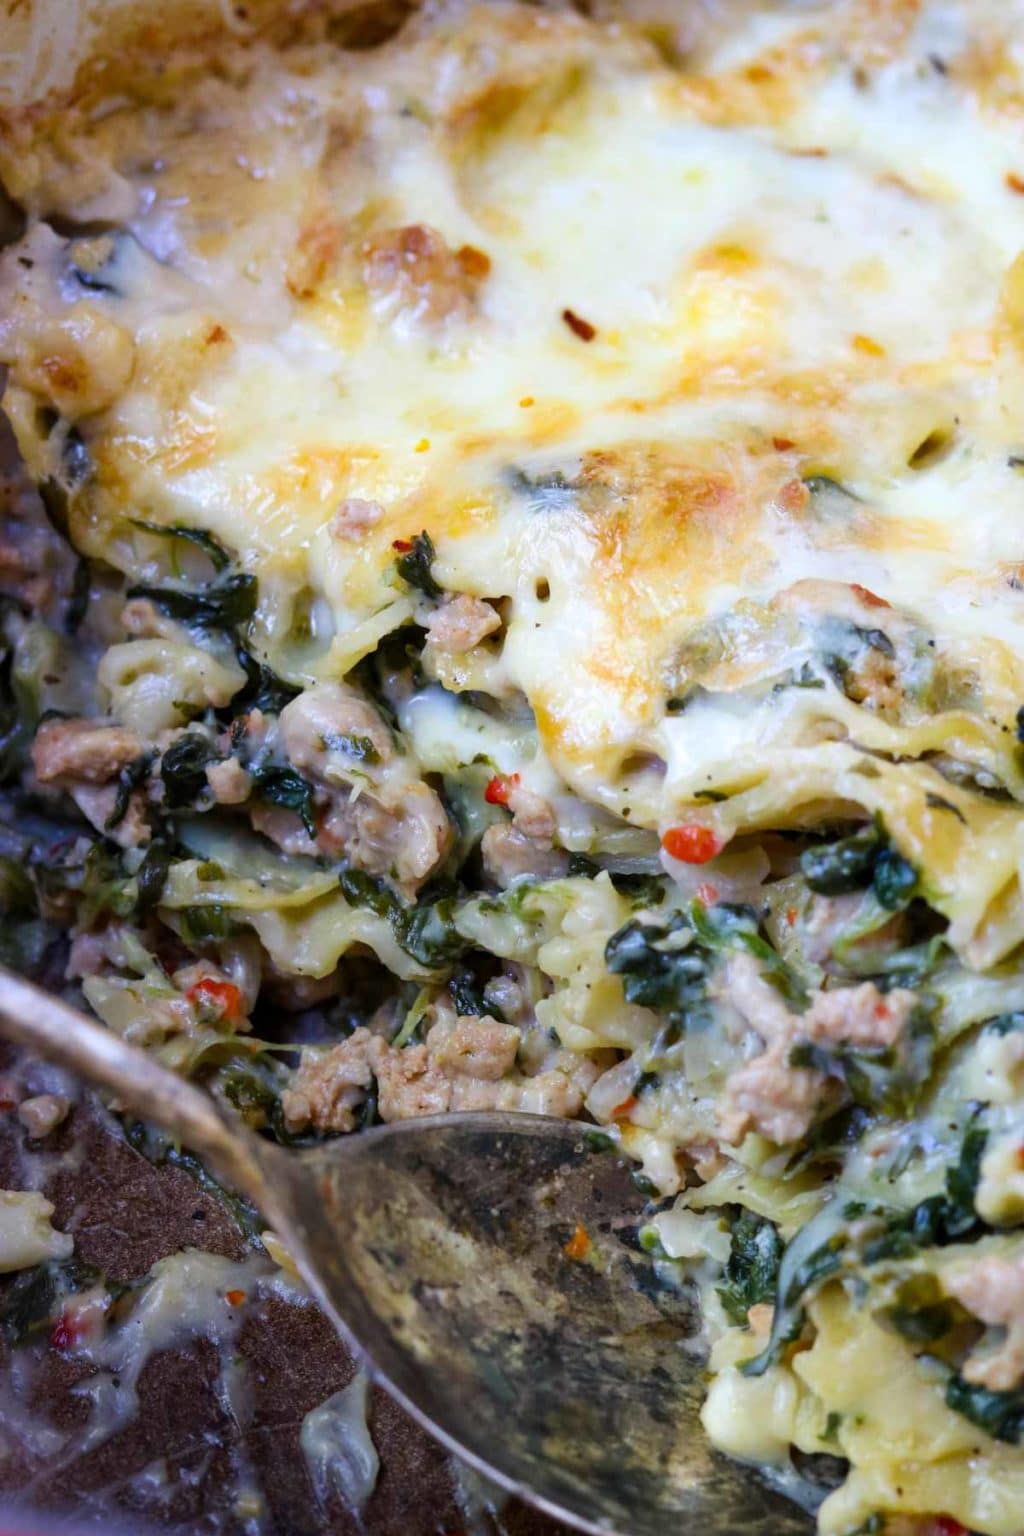 A scoop taken out of the Spinach Artichoke Lasagna to reveal the layers of ingredients